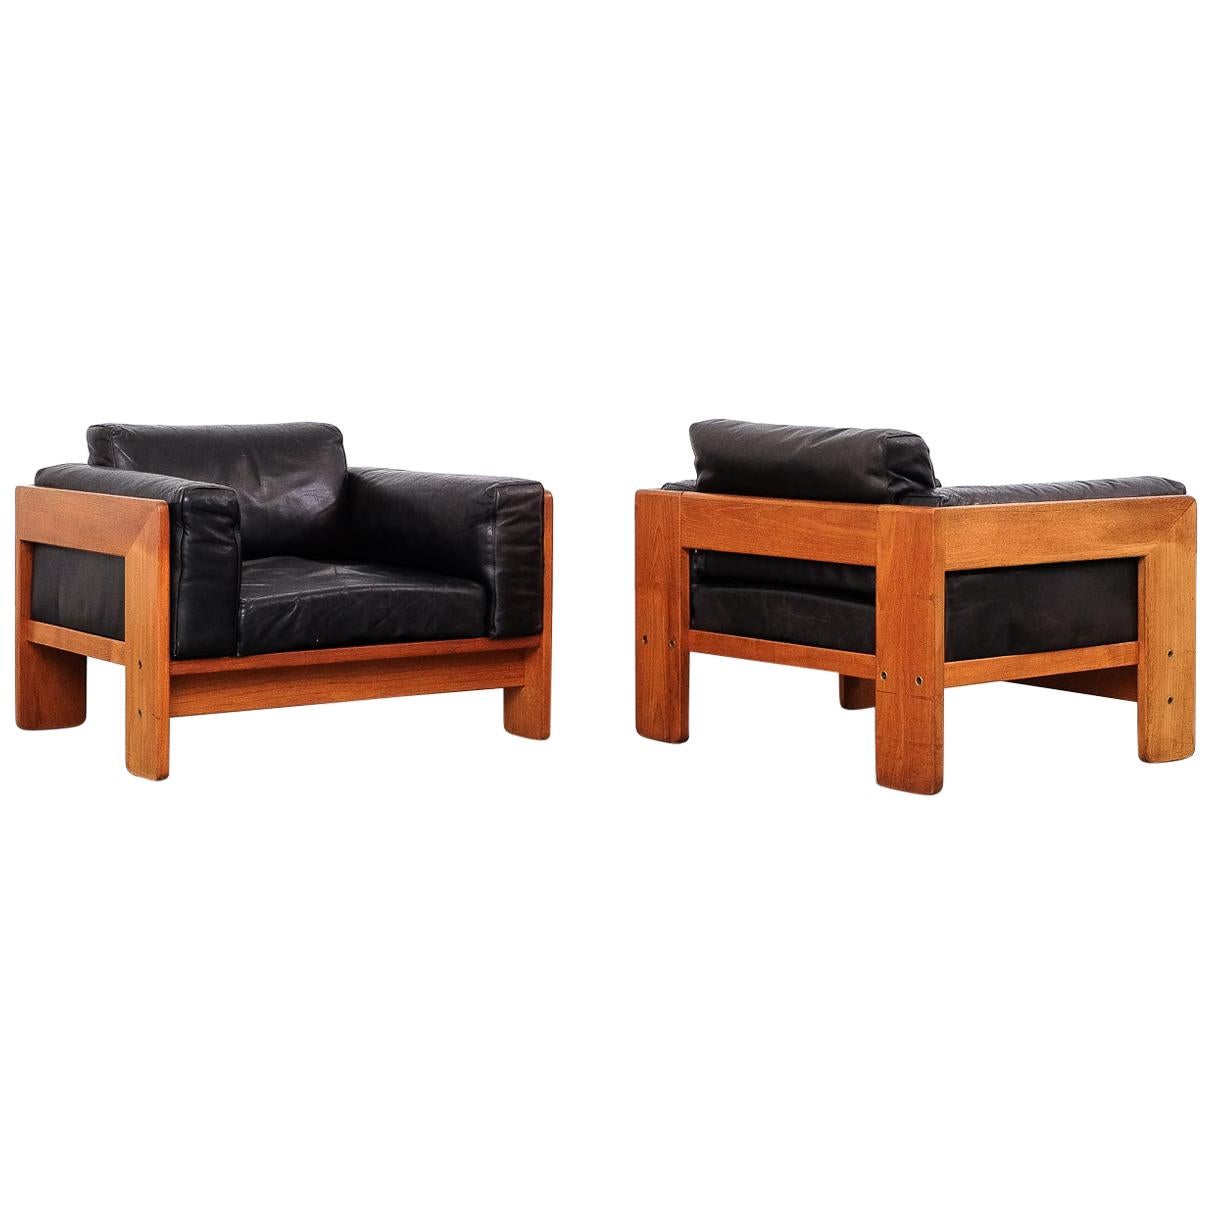 Tobia Scarpa 'Bastiano' Lounge Chairs in Teak and Black Leather